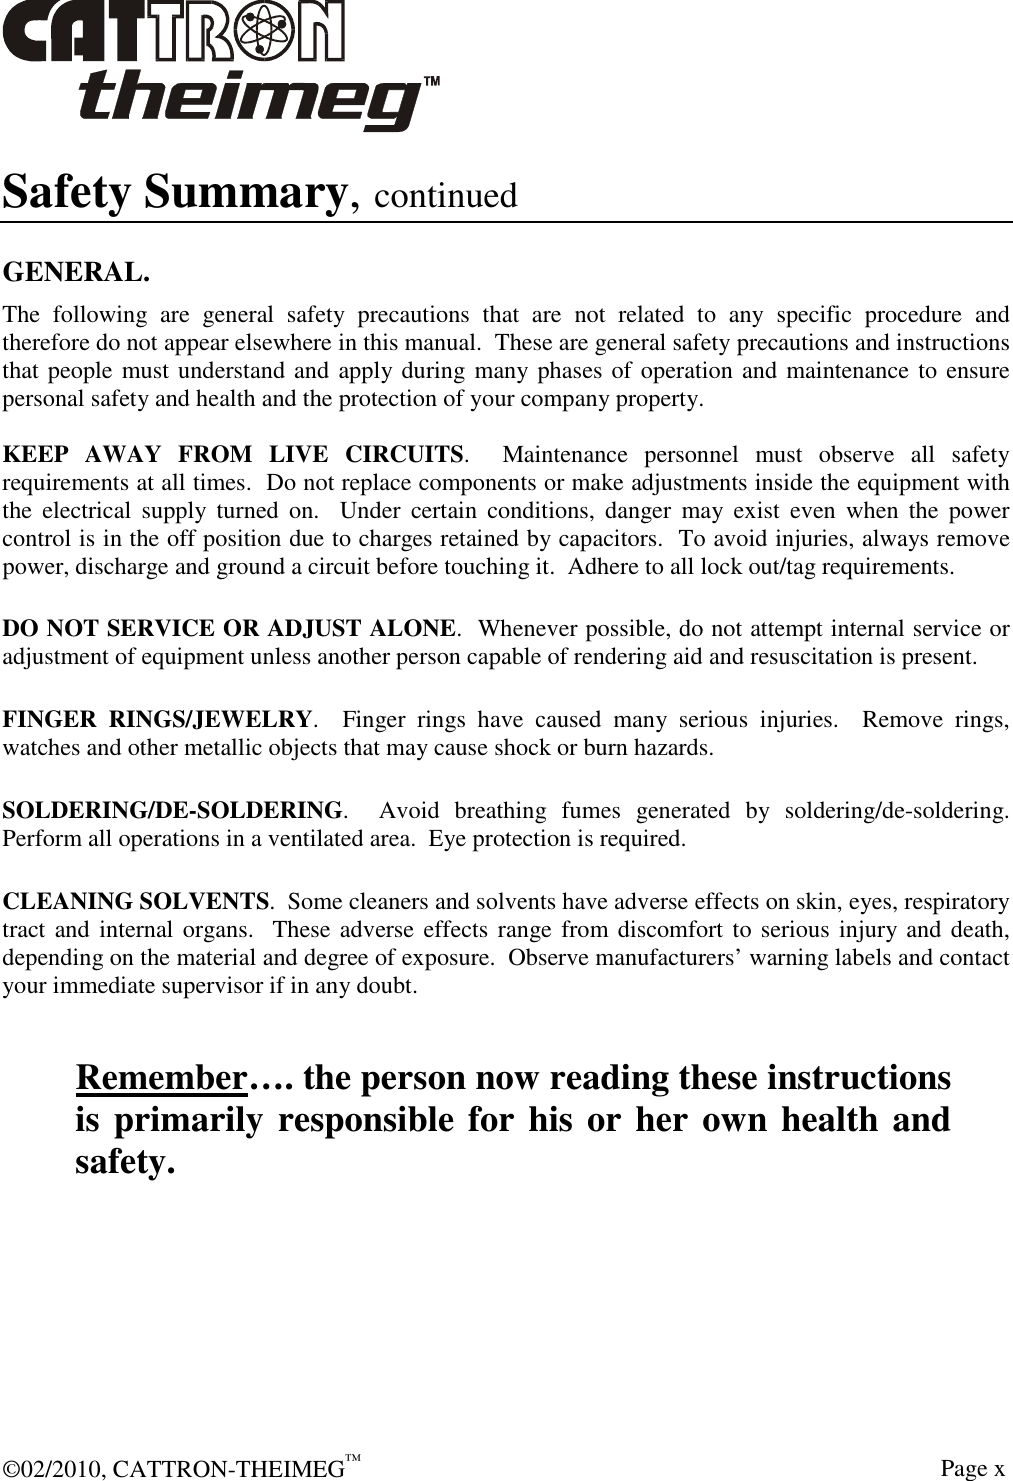  ©02/2010, CATTRON-THEIMEG™     Page x Safety Summary, continued  GENERAL. The  following  are  general  safety  precautions  that  are  not  related  to  any  specific  procedure  and therefore do not appear elsewhere in this manual.  These are general safety precautions and instructions that people must understand and apply during many phases of operation and maintenance to ensure personal safety and health and the protection of your company property.  KEEP  AWAY  FROM  LIVE  CIRCUITS.    Maintenance  personnel  must  observe  all  safety requirements at all times.  Do not replace components or make adjustments inside the equipment with the  electrical  supply  turned  on.    Under  certain  conditions,  danger  may  exist  even  when  the  power control is in the off position due to charges retained by capacitors.  To avoid injuries, always remove power, discharge and ground a circuit before touching it.  Adhere to all lock out/tag requirements.   DO NOT SERVICE OR ADJUST ALONE.  Whenever possible, do not attempt internal service or adjustment of equipment unless another person capable of rendering aid and resuscitation is present.   FINGER  RINGS/JEWELRY.    Finger  rings  have  caused  many  serious  injuries.    Remove  rings, watches and other metallic objects that may cause shock or burn hazards.     SOLDERING/DE-SOLDERING.    Avoid  breathing  fumes  generated  by  soldering/de-soldering. Perform all operations in a ventilated area.  Eye protection is required.   CLEANING SOLVENTS.  Some cleaners and solvents have adverse effects on skin, eyes, respiratory tract and internal organs.  These adverse effects range from discomfort to serious injury and death, depending on the material and degree of exposure.  Observe manufacturers’ warning labels and contact your immediate supervisor if in any doubt.   Remember…. the person now reading these instructions is primarily responsible for his or her own health and safety. 